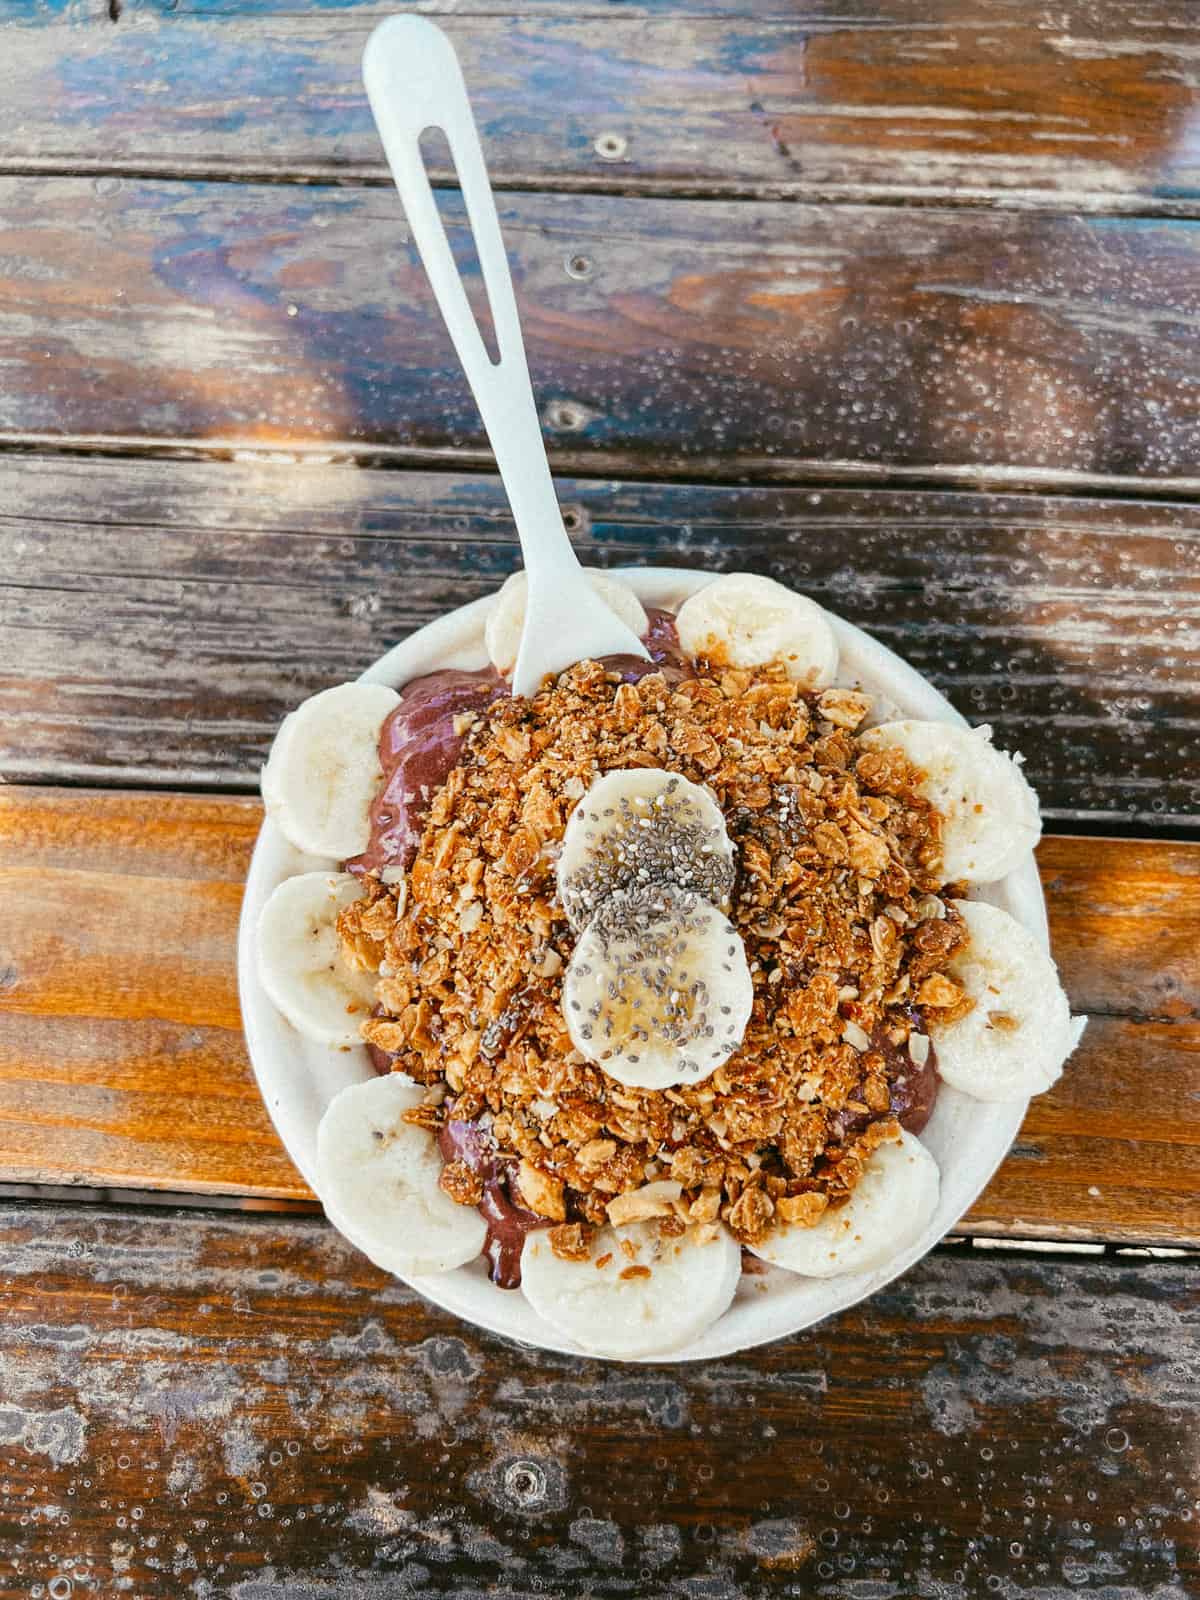 A delicious acai bowl served with bananas and granola at one of the best places to eat in Kauai.